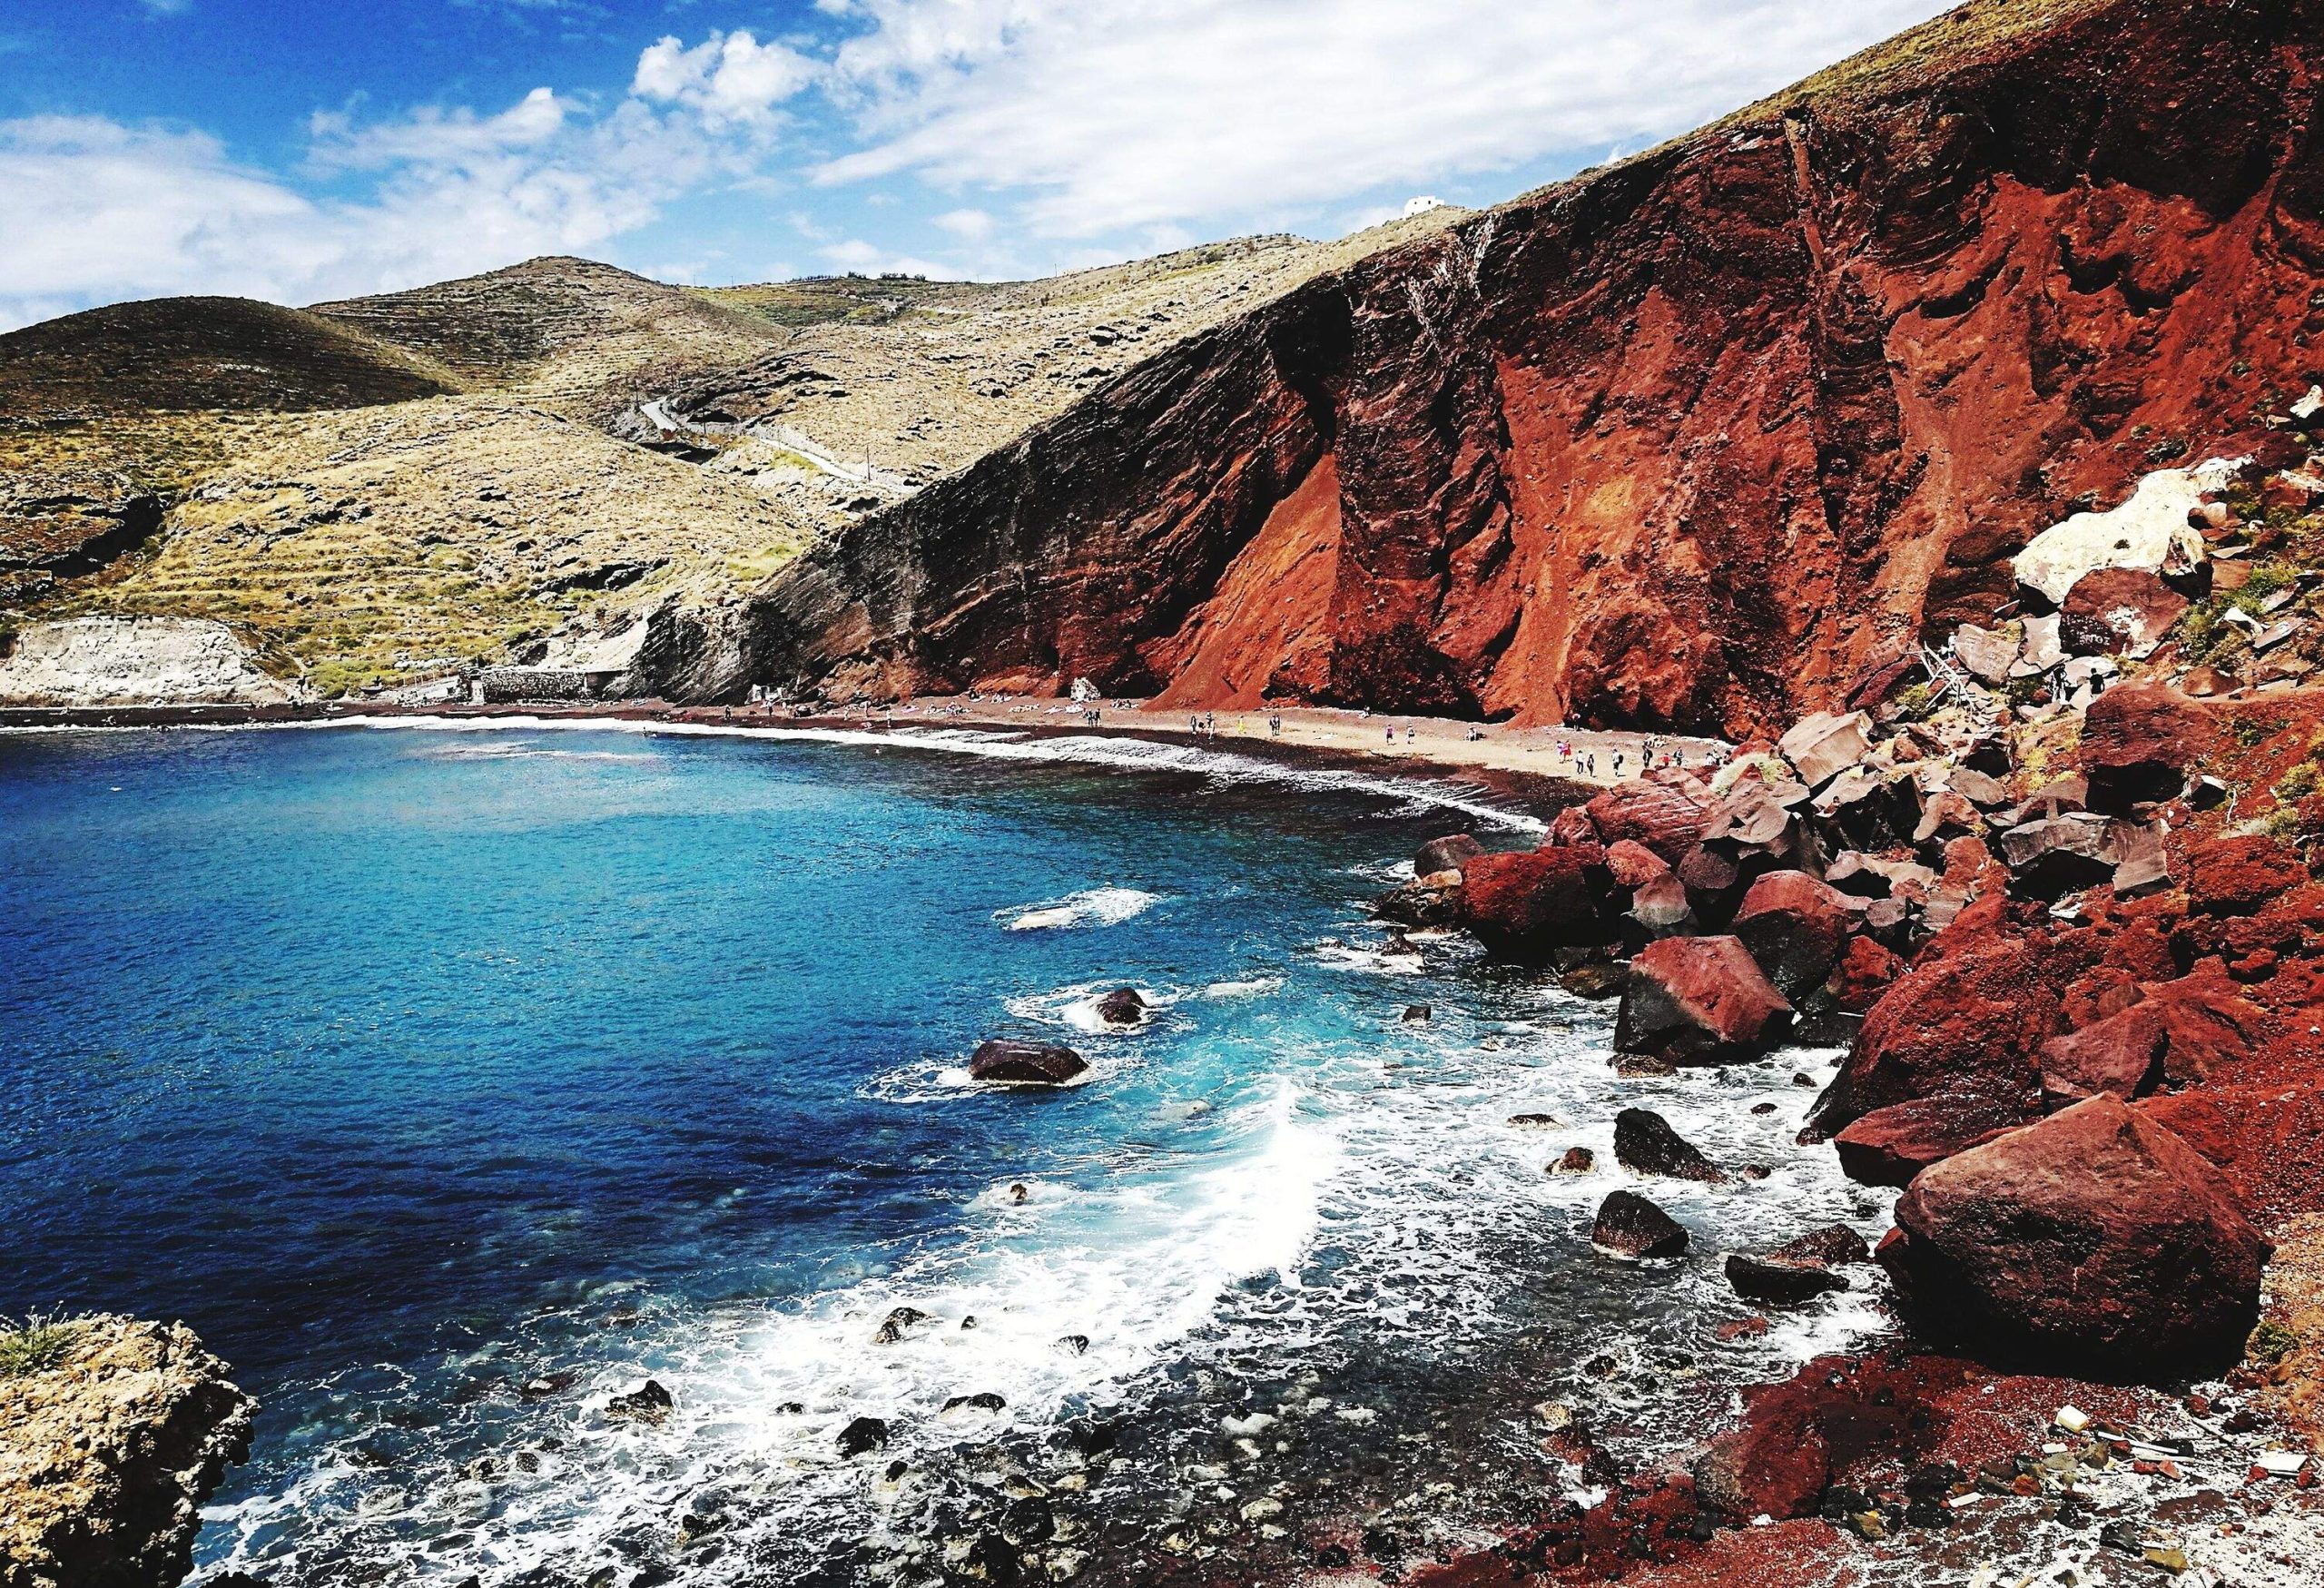 A beach with big boulders along a red steep cliff.